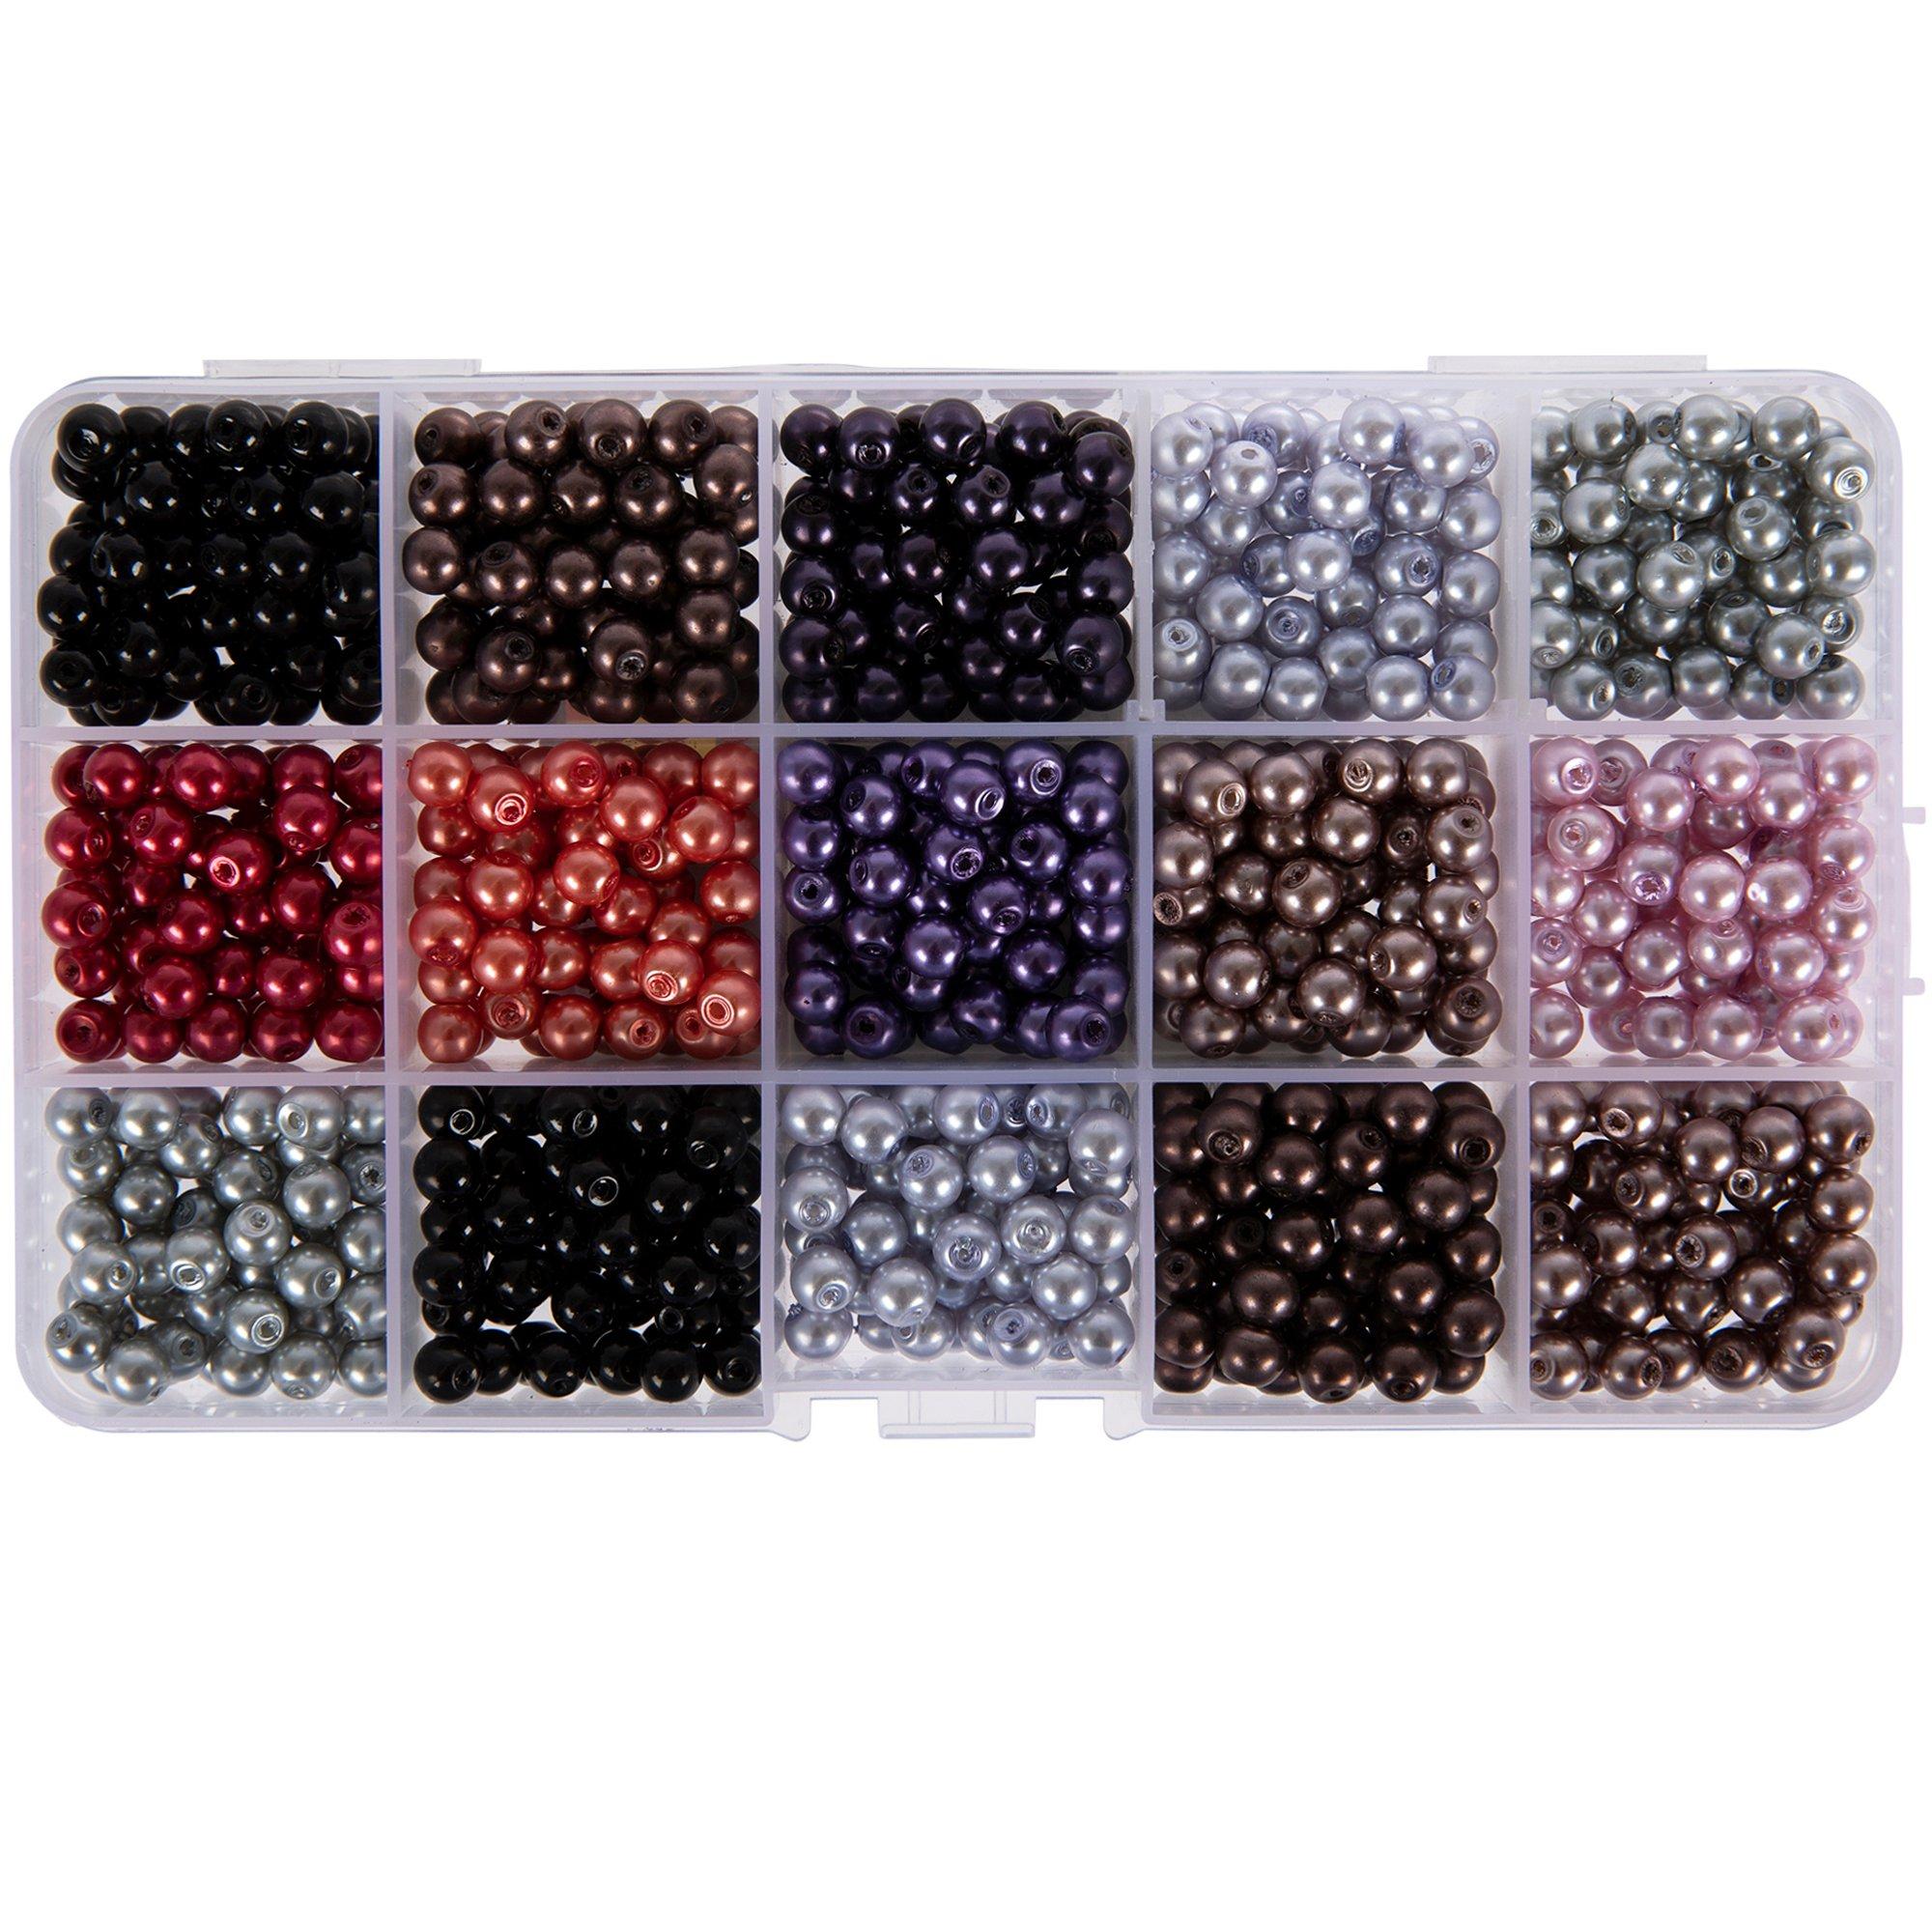 400 Assorted Size & Color Glass Round Pearl Beads a Mix of Small